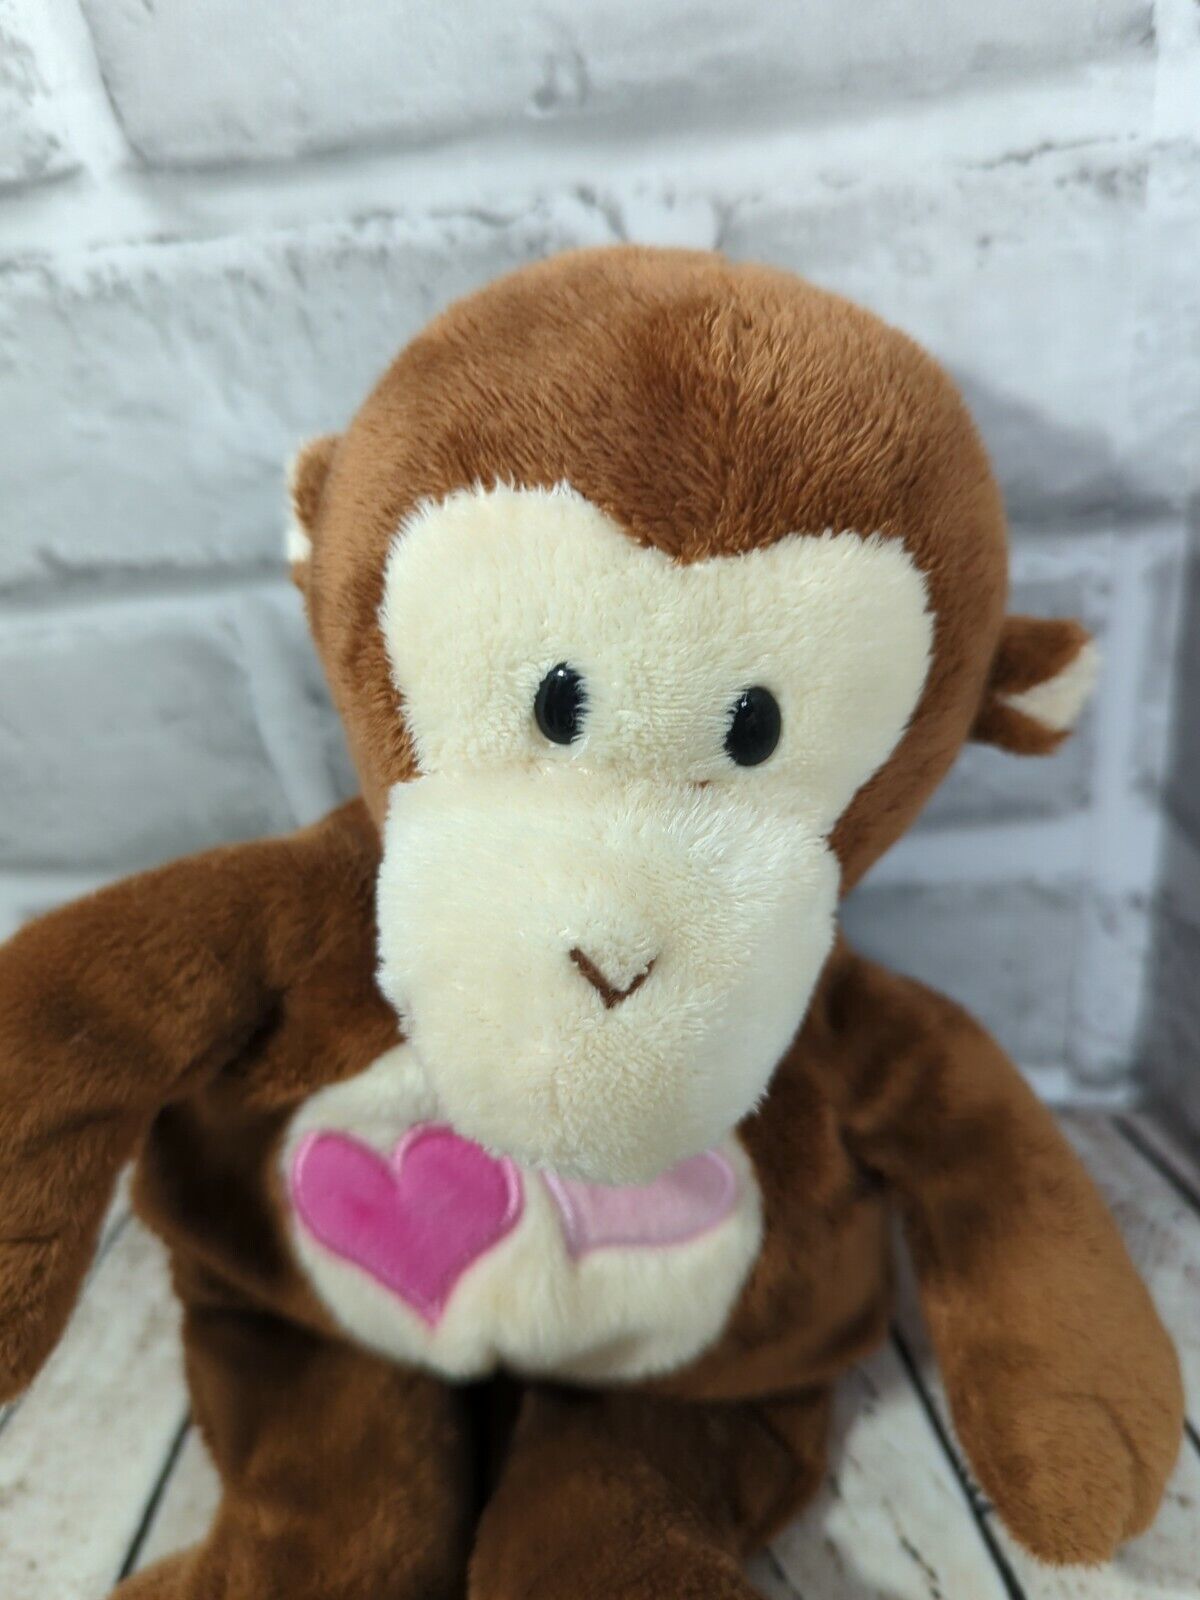 Ty Pluffies plush Lovesy monkey brown pink hearts Valentine's Day 2010 soft toy - $24.74